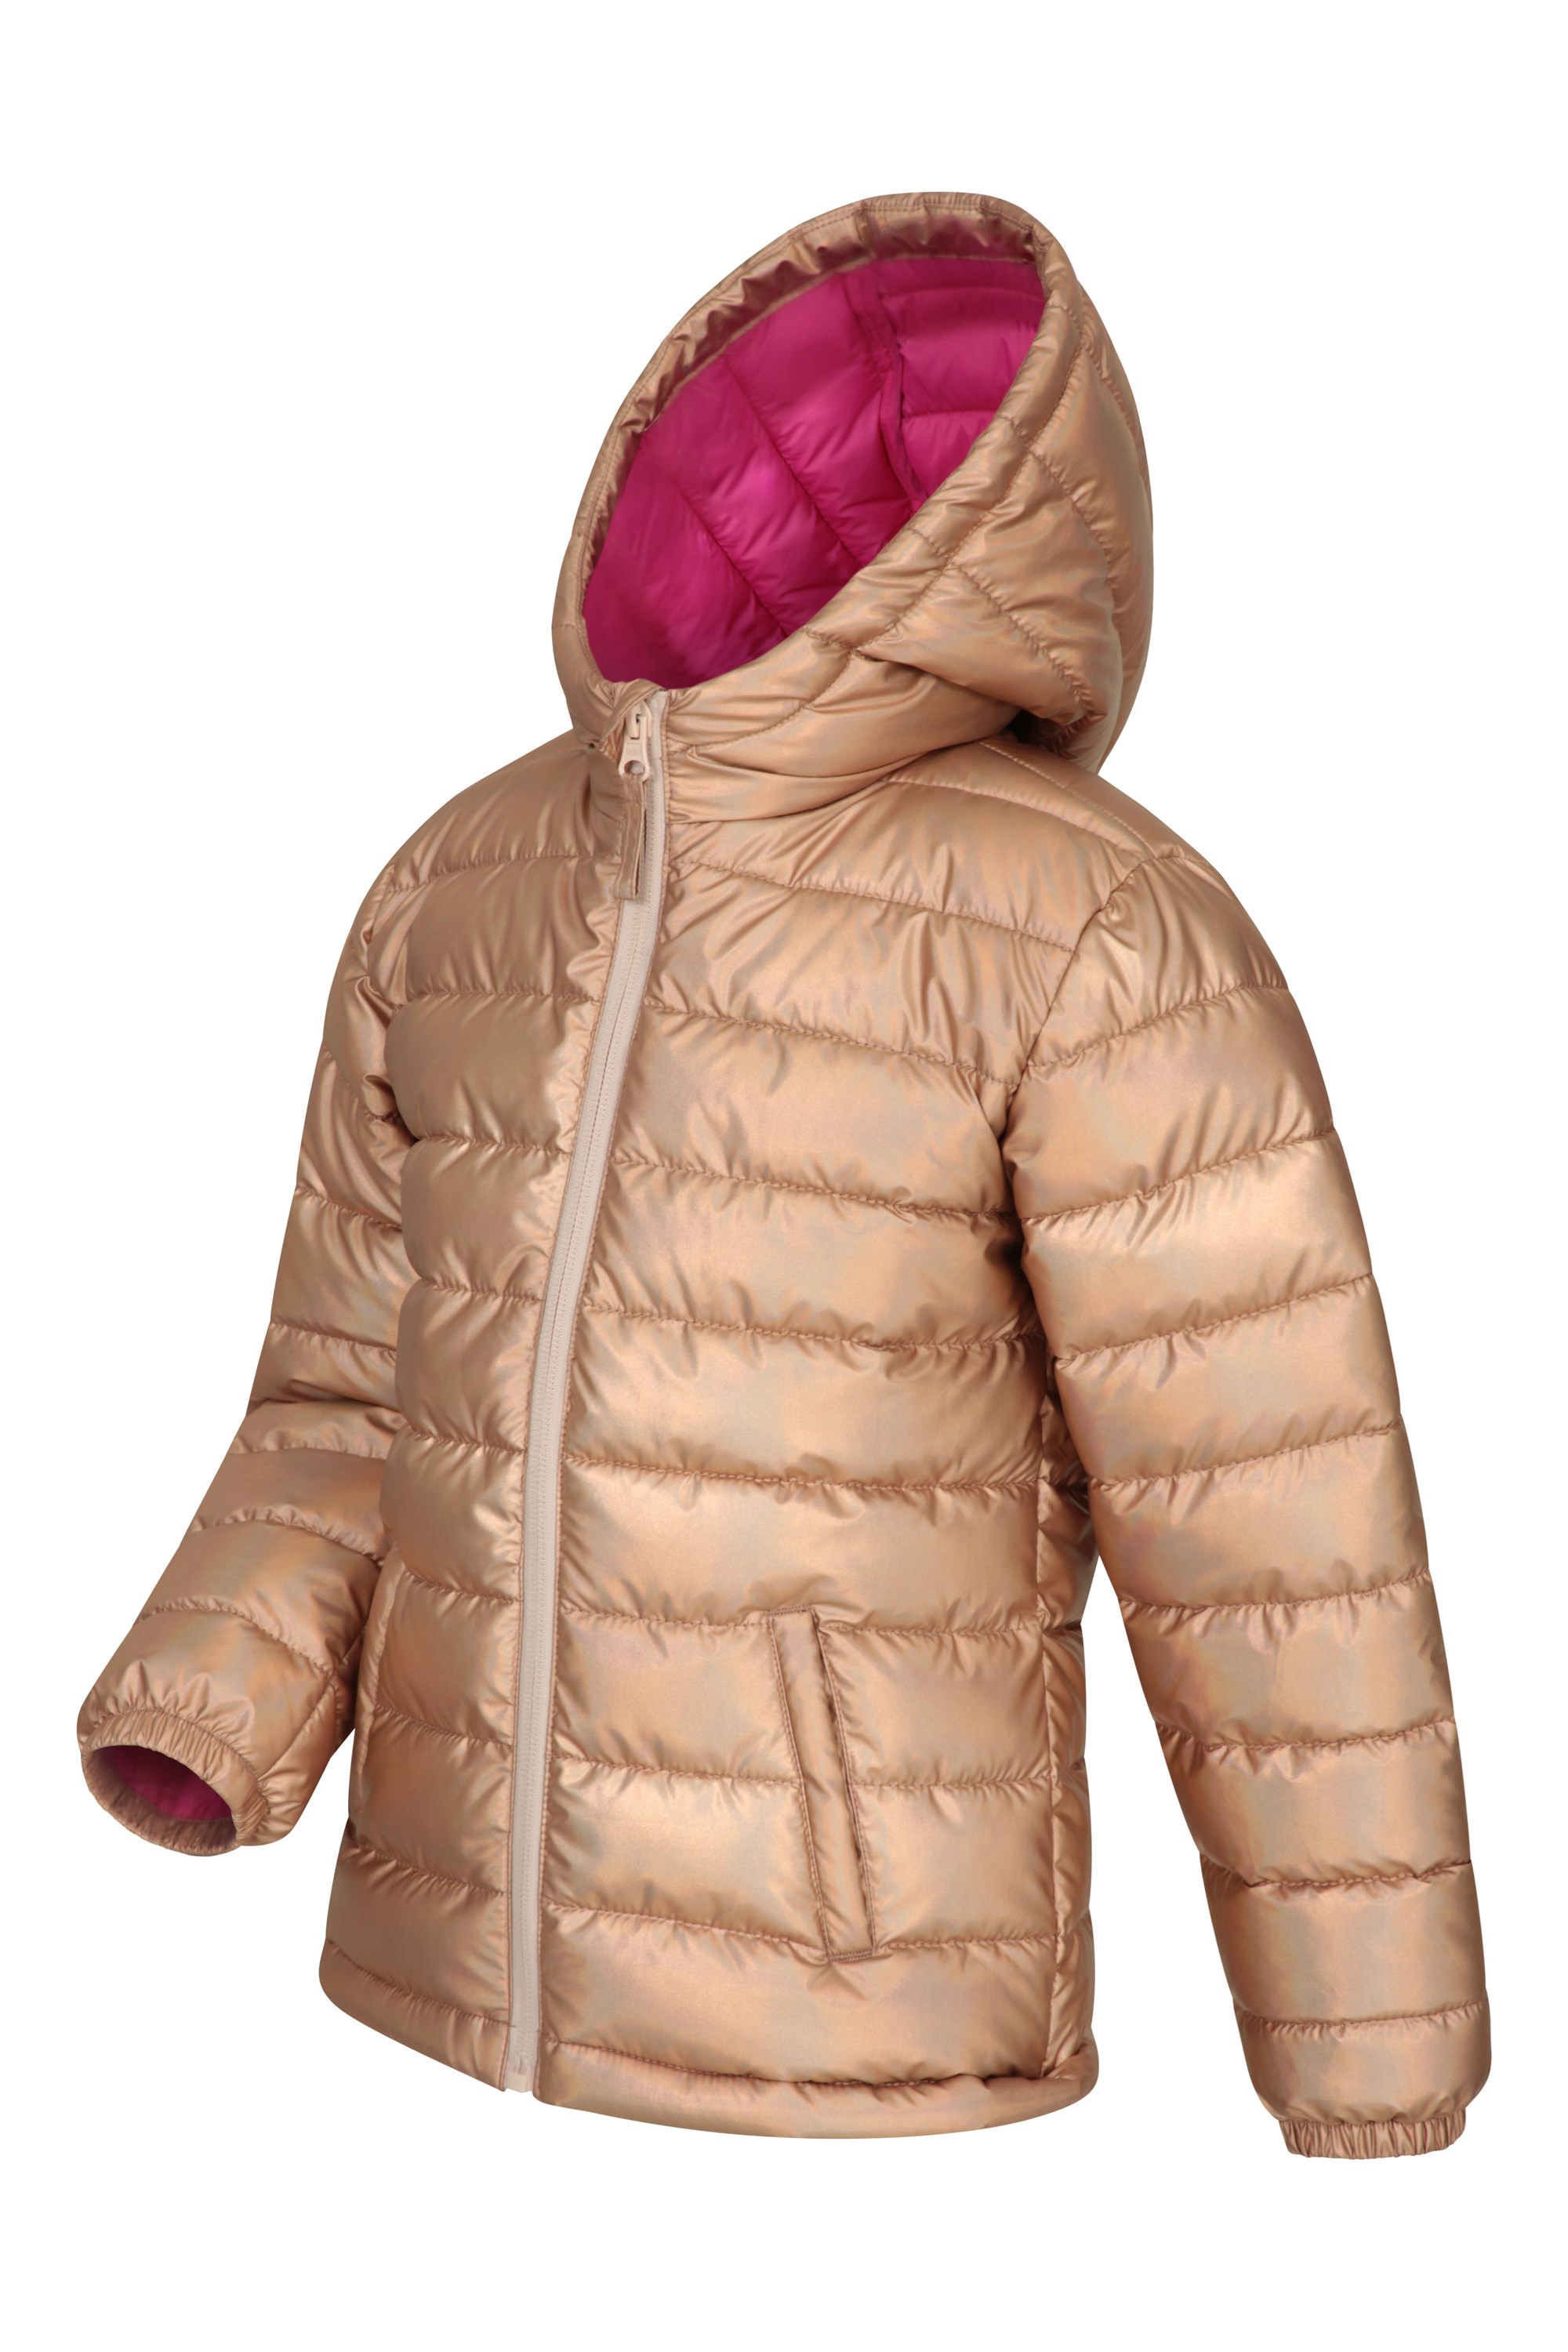 Mountain Warehouse Seasons Kids Padded Puffer Jacket - Boys & Girls :  : Clothing, Shoes & Accessories